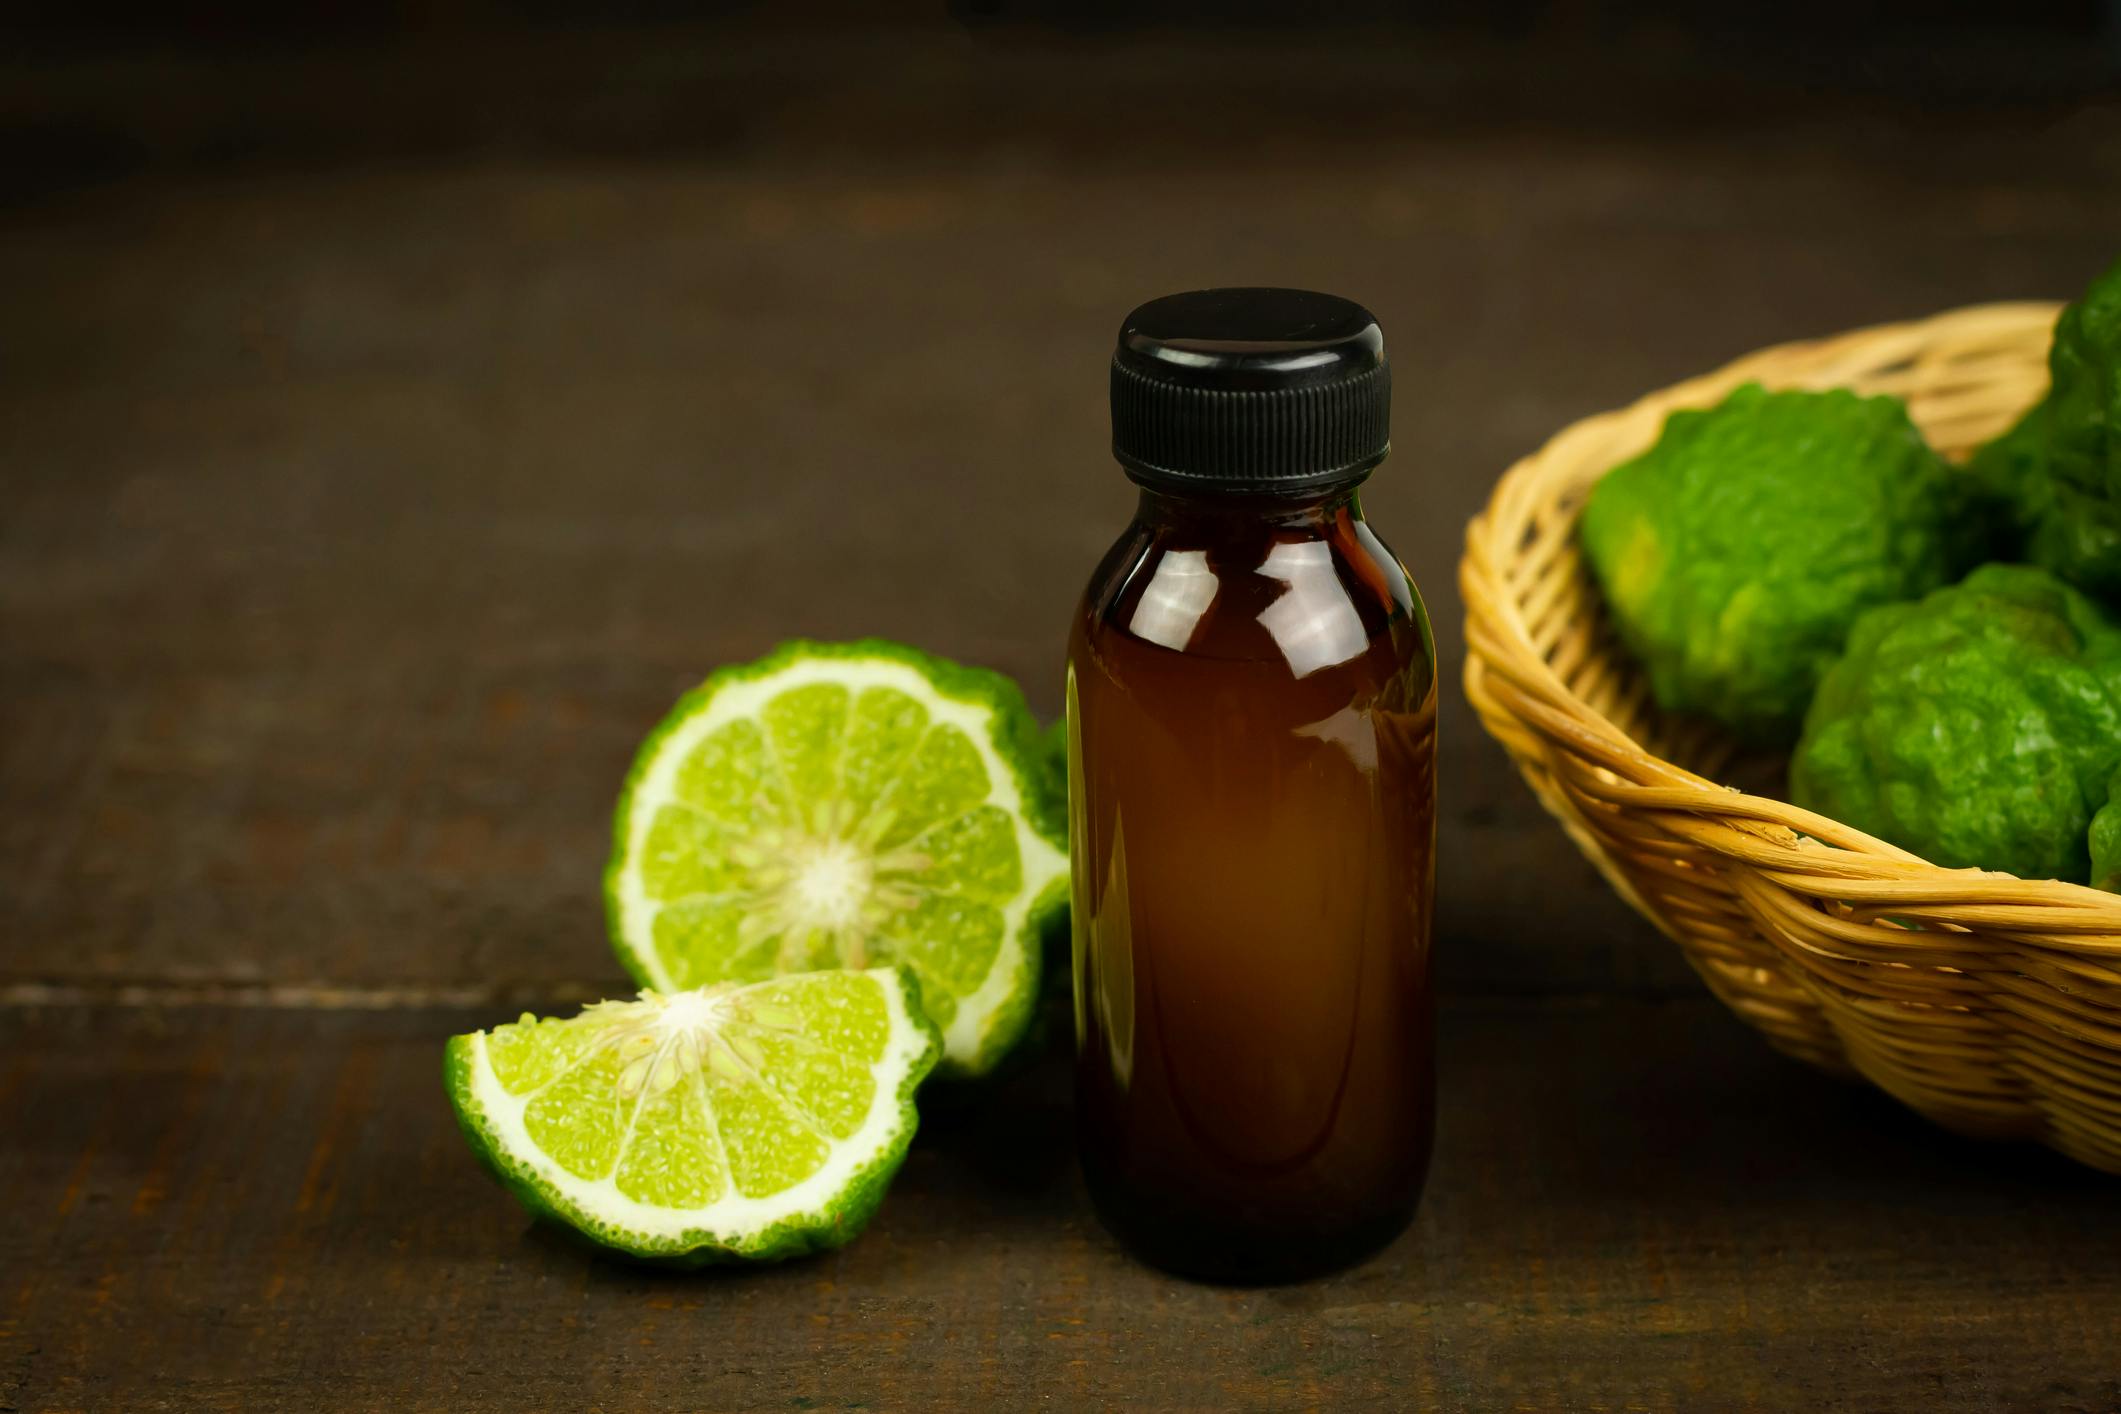 Oil bottle next to a basket of limes